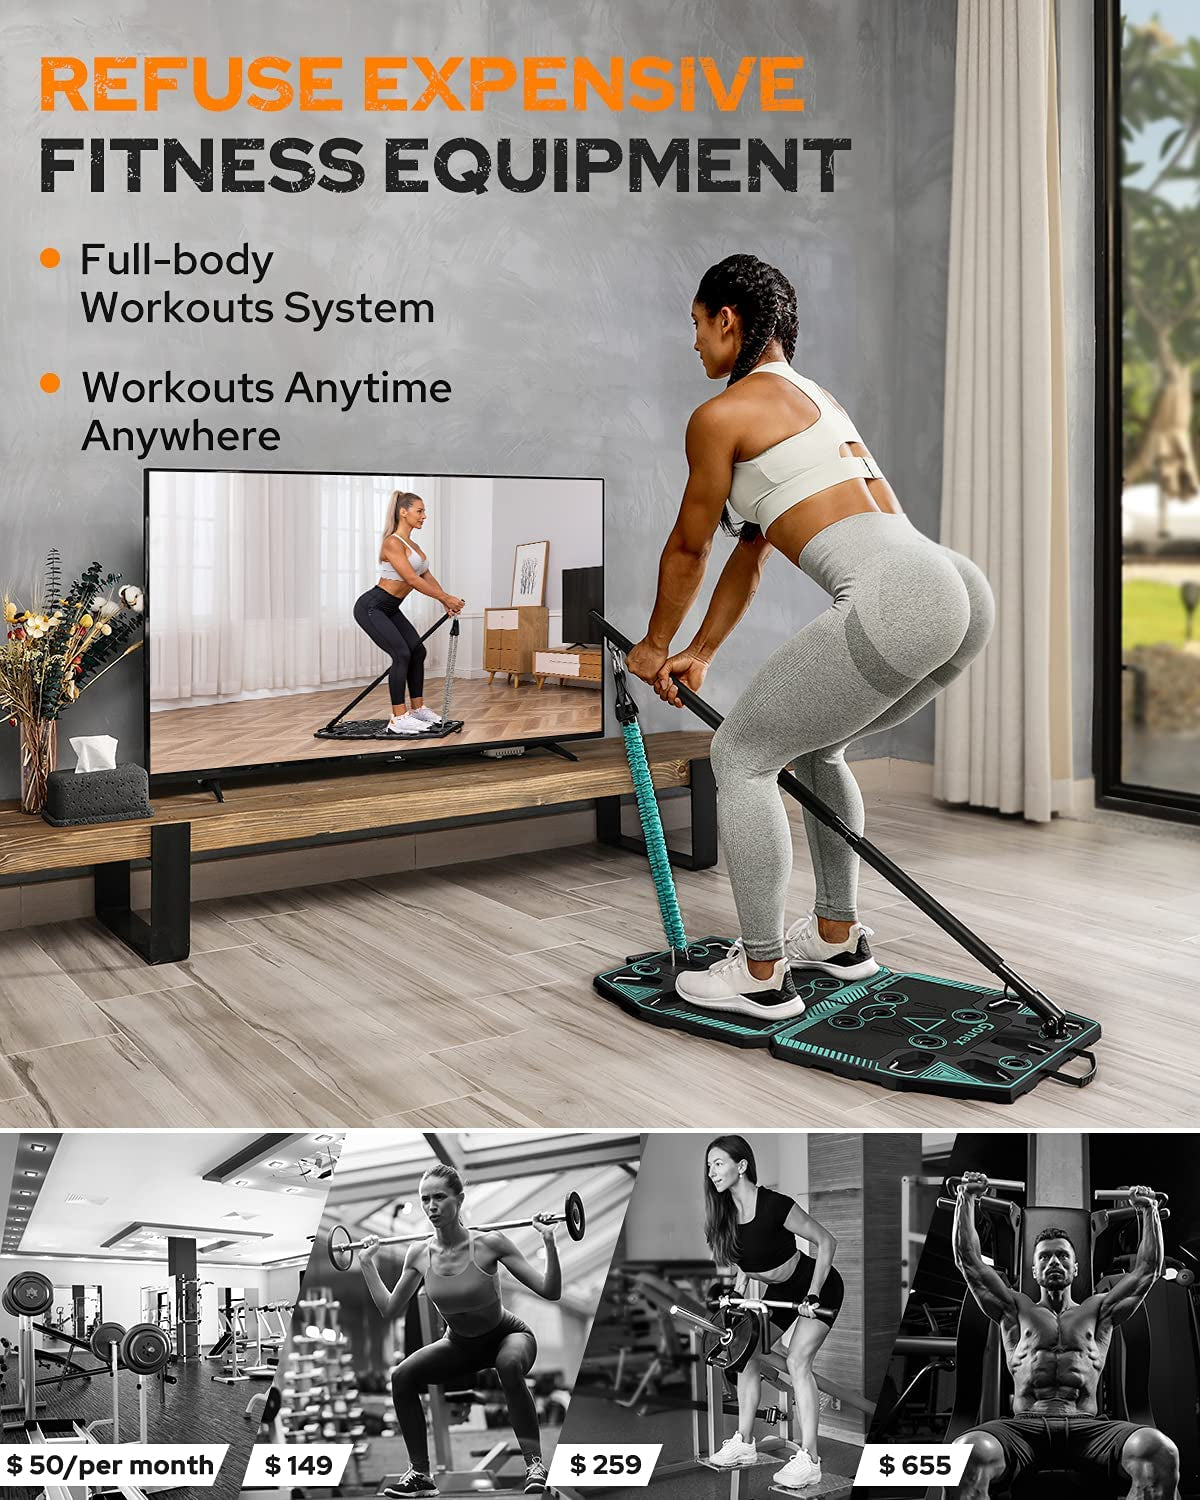 Portable Home Gym Workout Equipment with 14 Exercise Accessories Ab Roller Wheel,Elastic Resistance Bands,Push-Up Stand,Post Landmine Sleeve and More for Full Body Workouts System